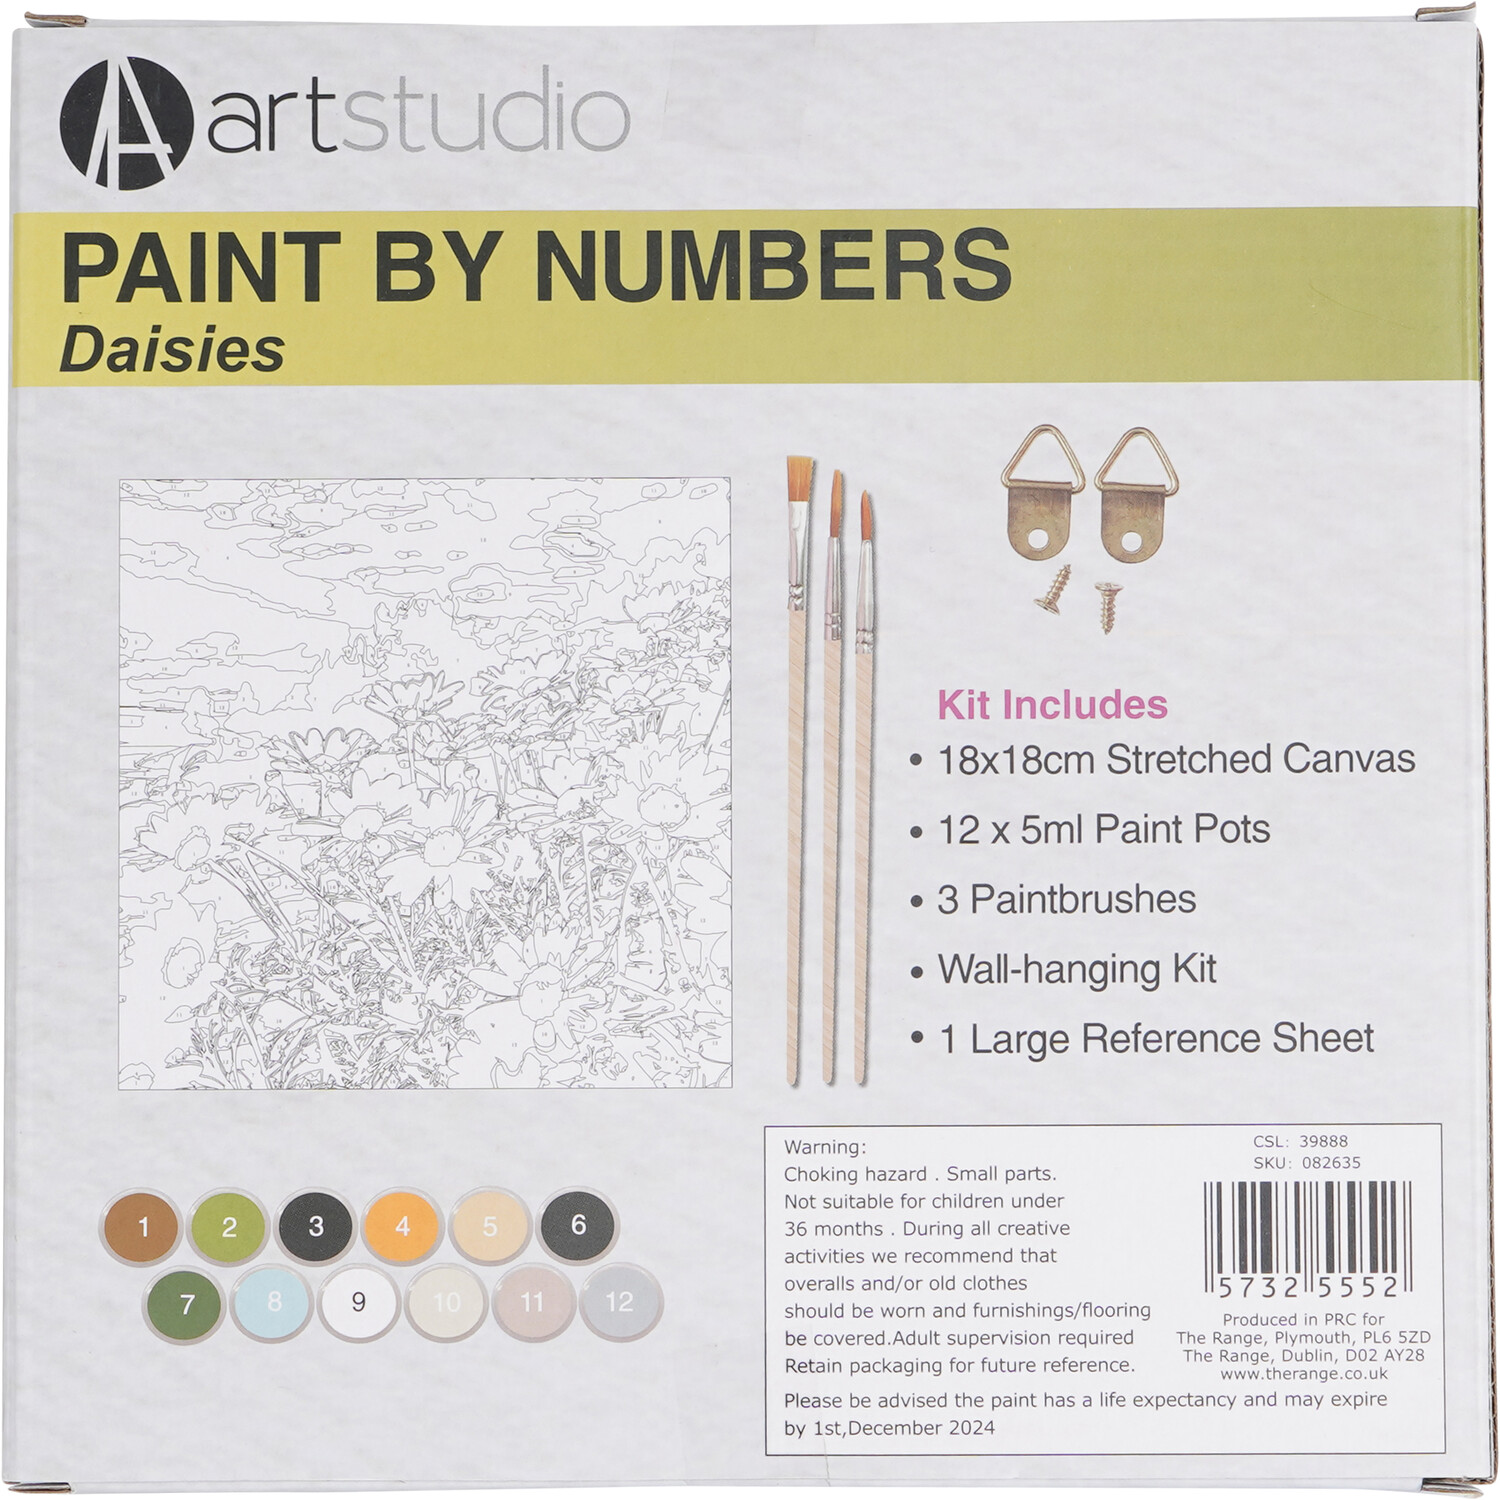 Art Studio Paint by Numbers - Daisies Image 3